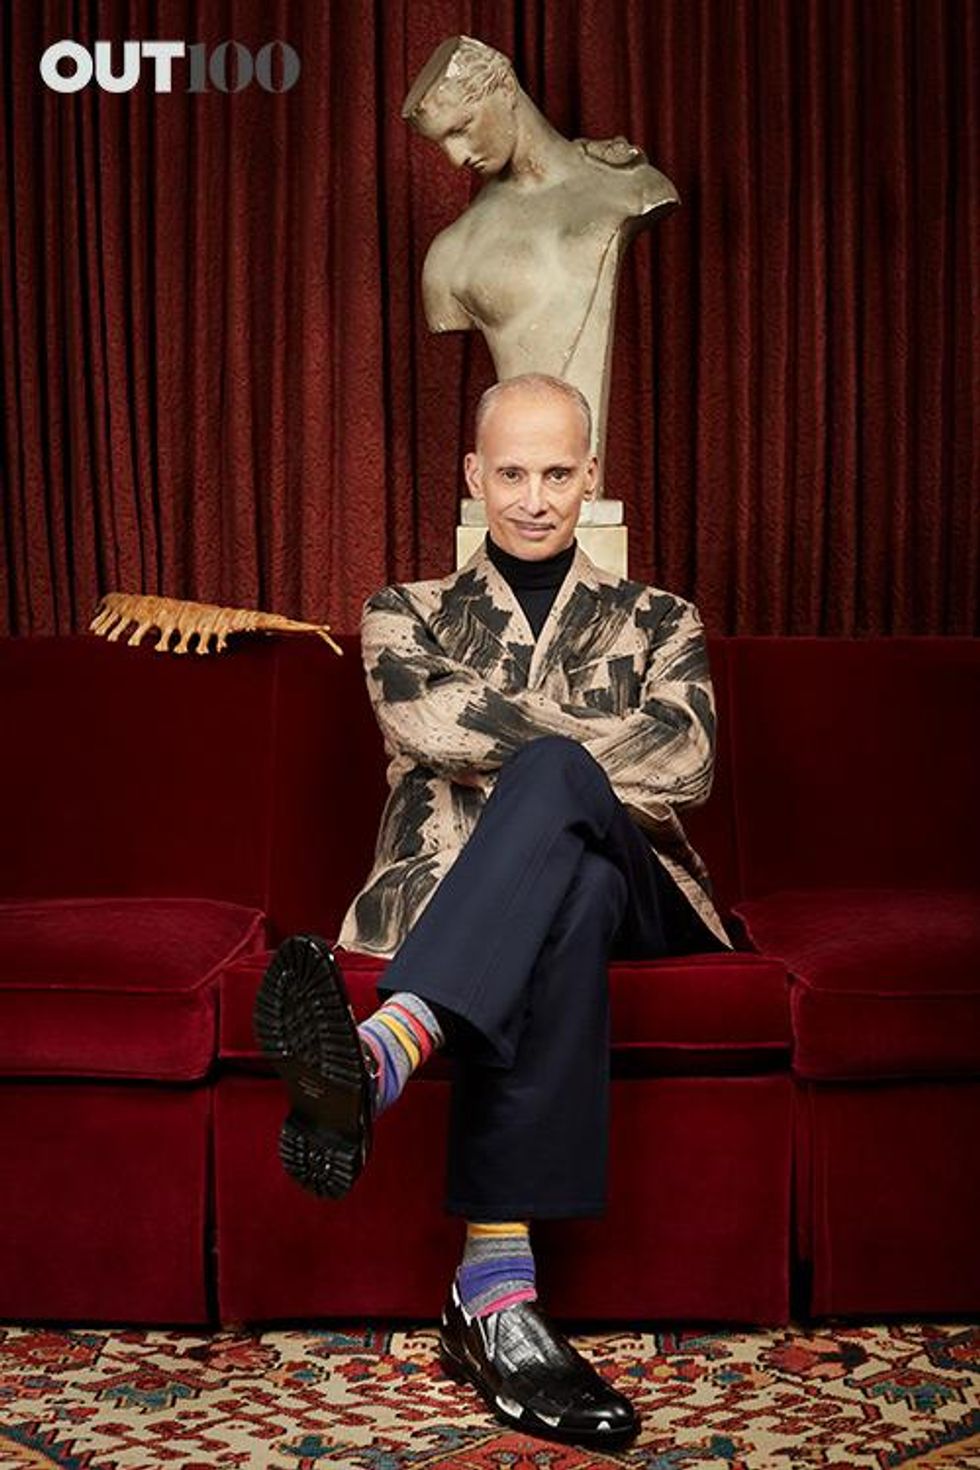 OUT100: John Waters, Filmmaker, Author